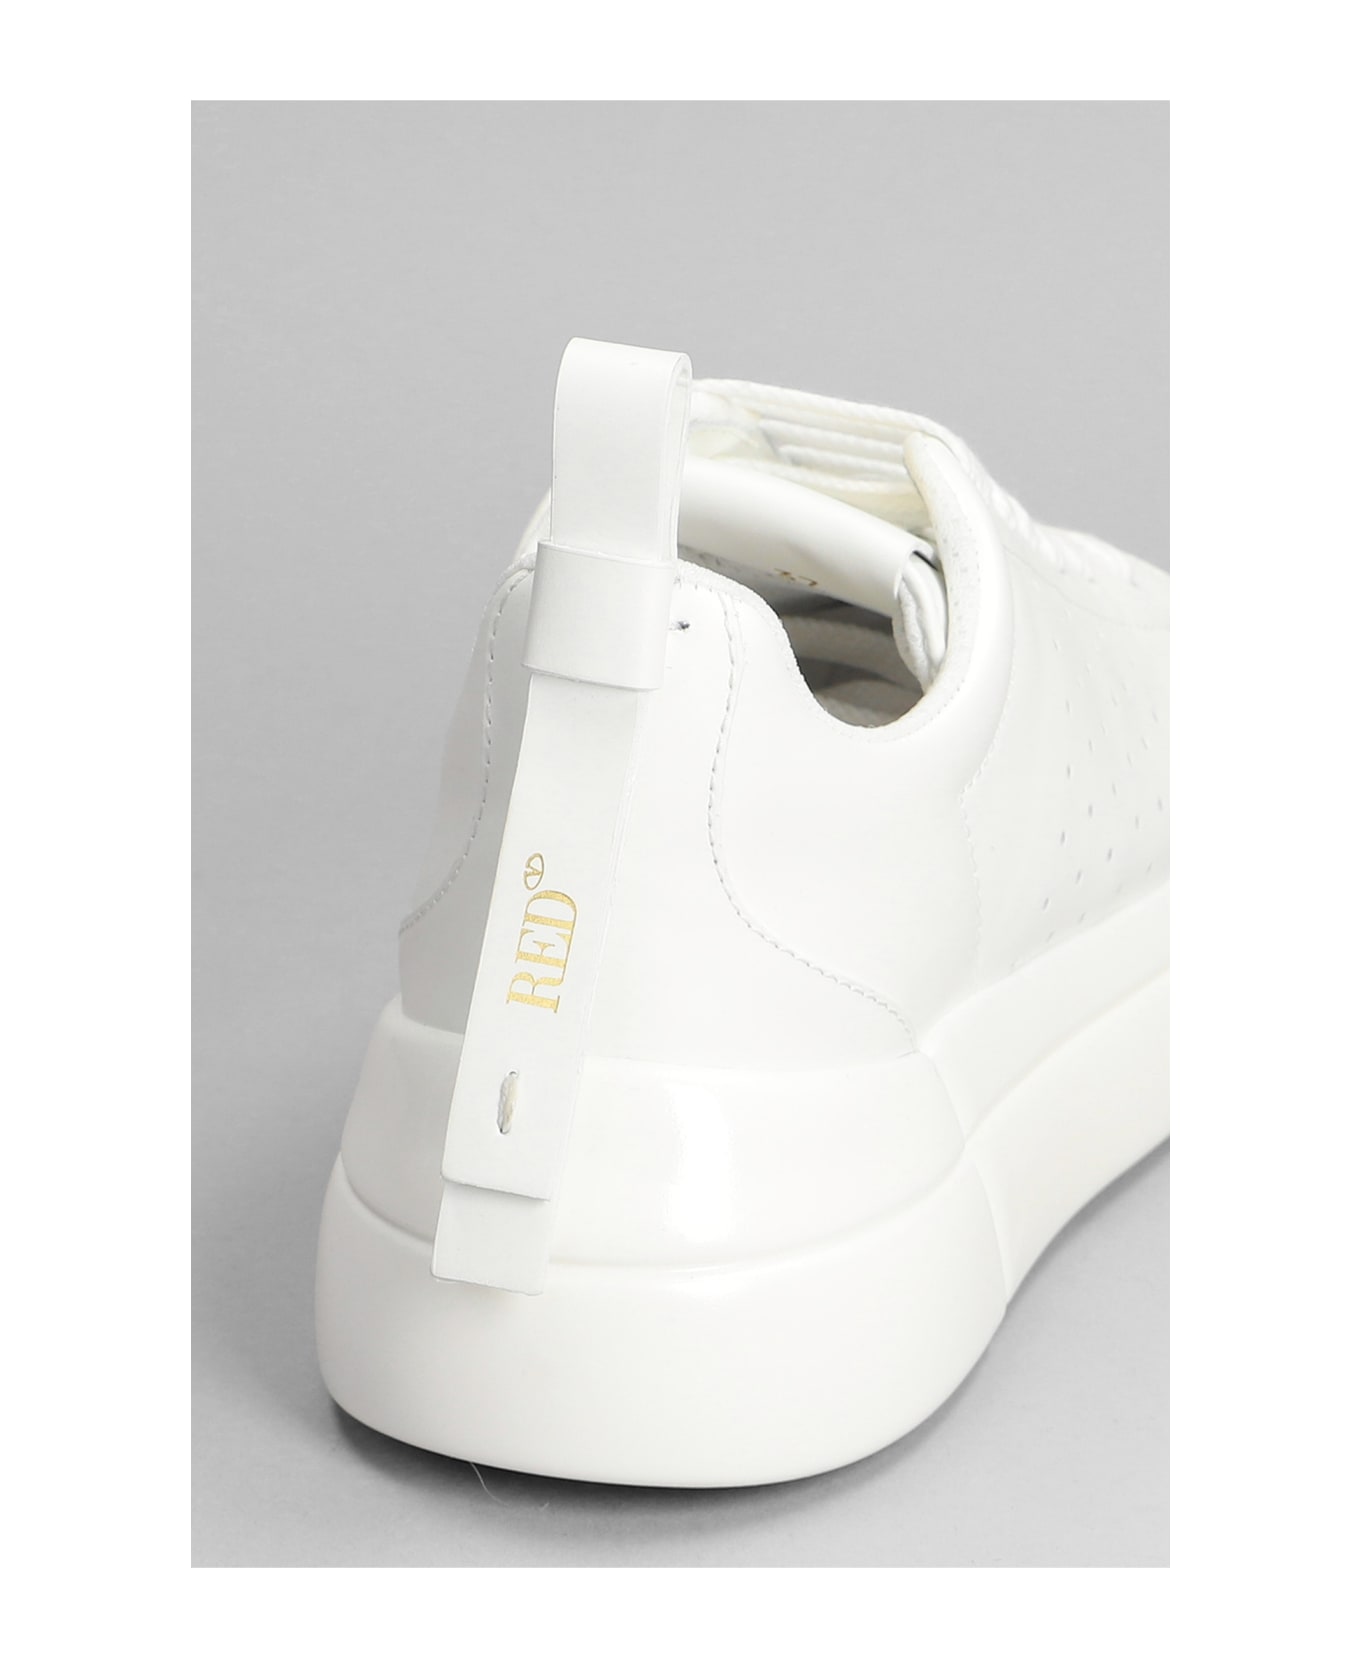 RED Valentino Bowalk Sneakers In White Leather - white ウェッジシューズ